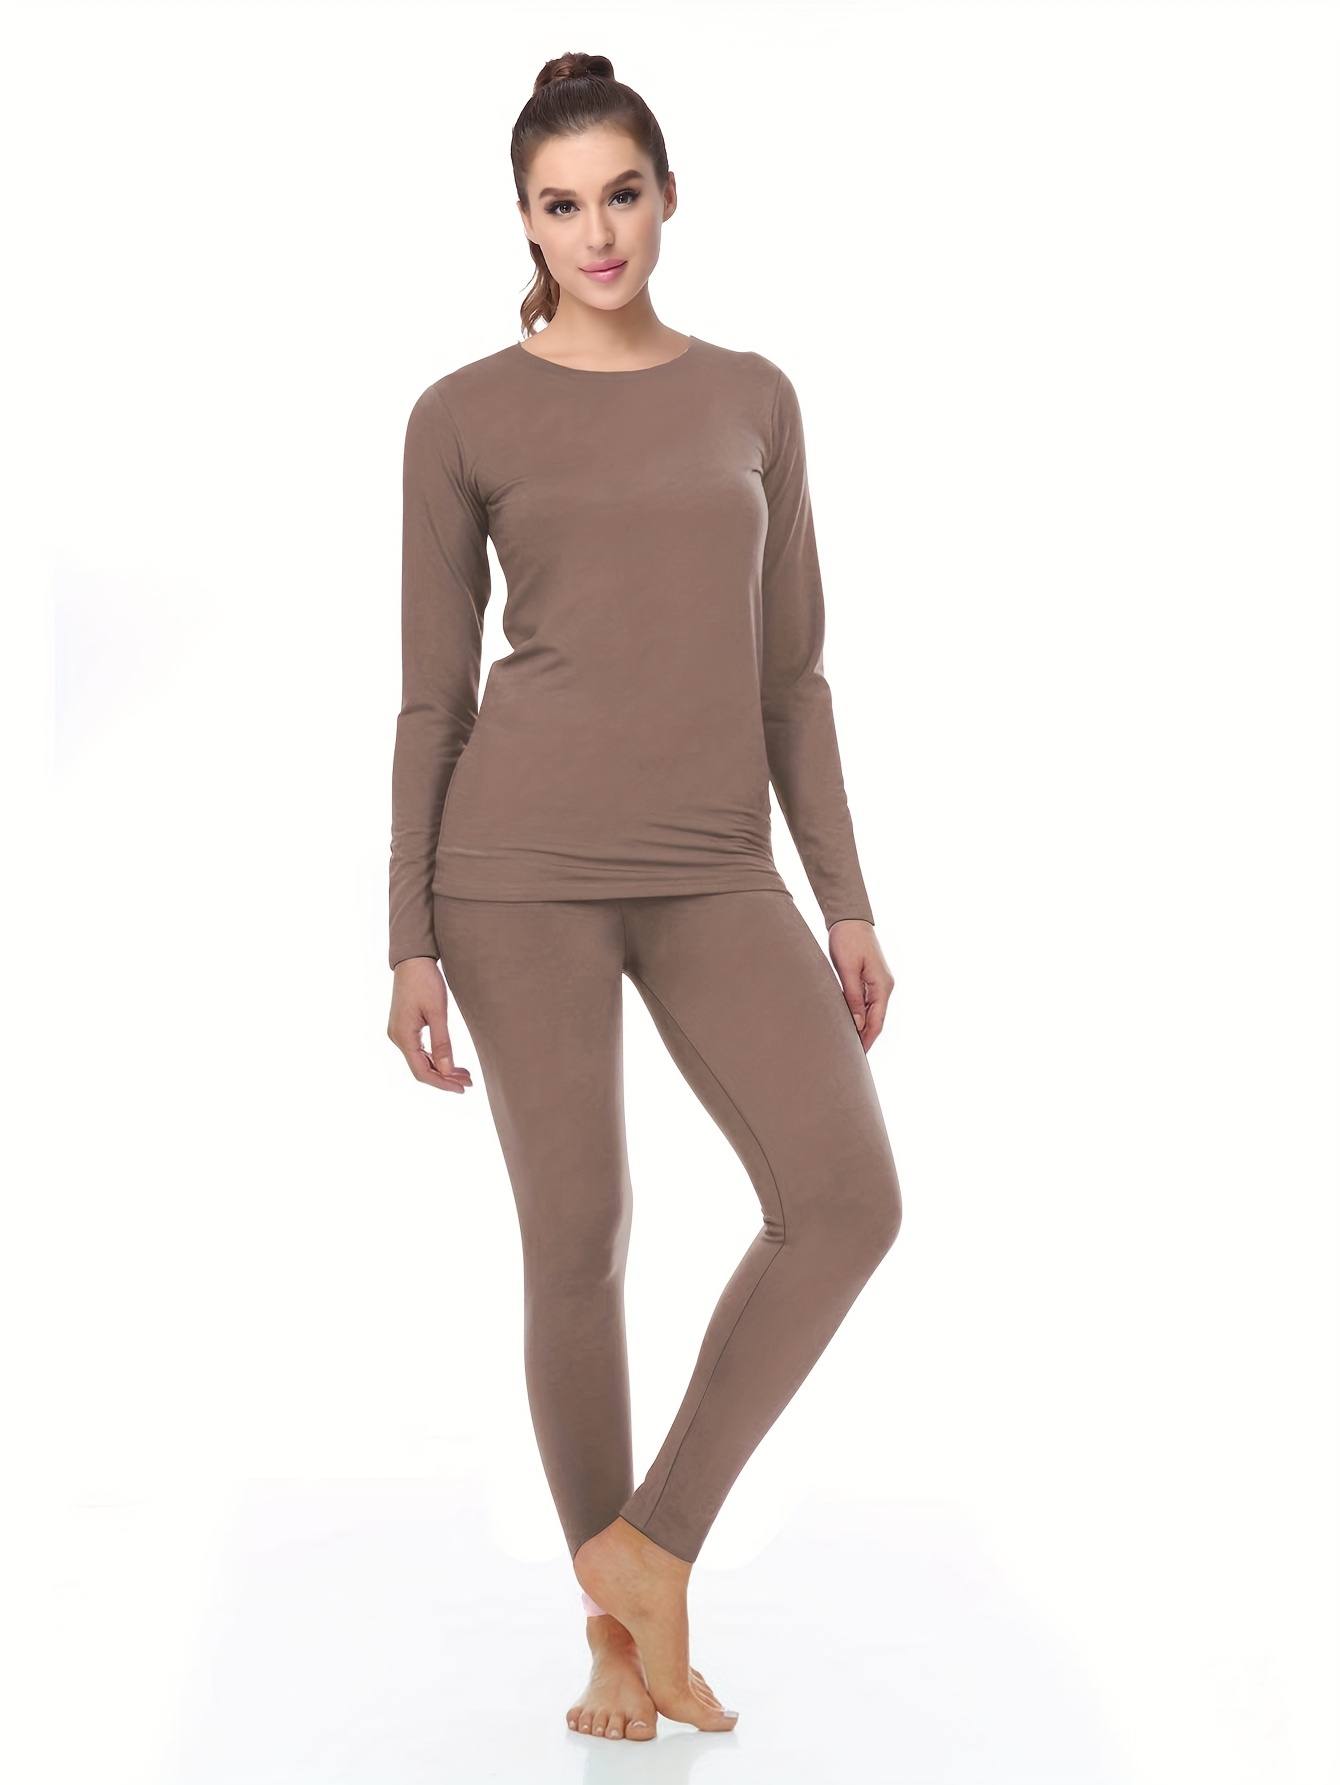 Thermal Underwear For Women (Thermal Long Johns) Sleeve Shirt